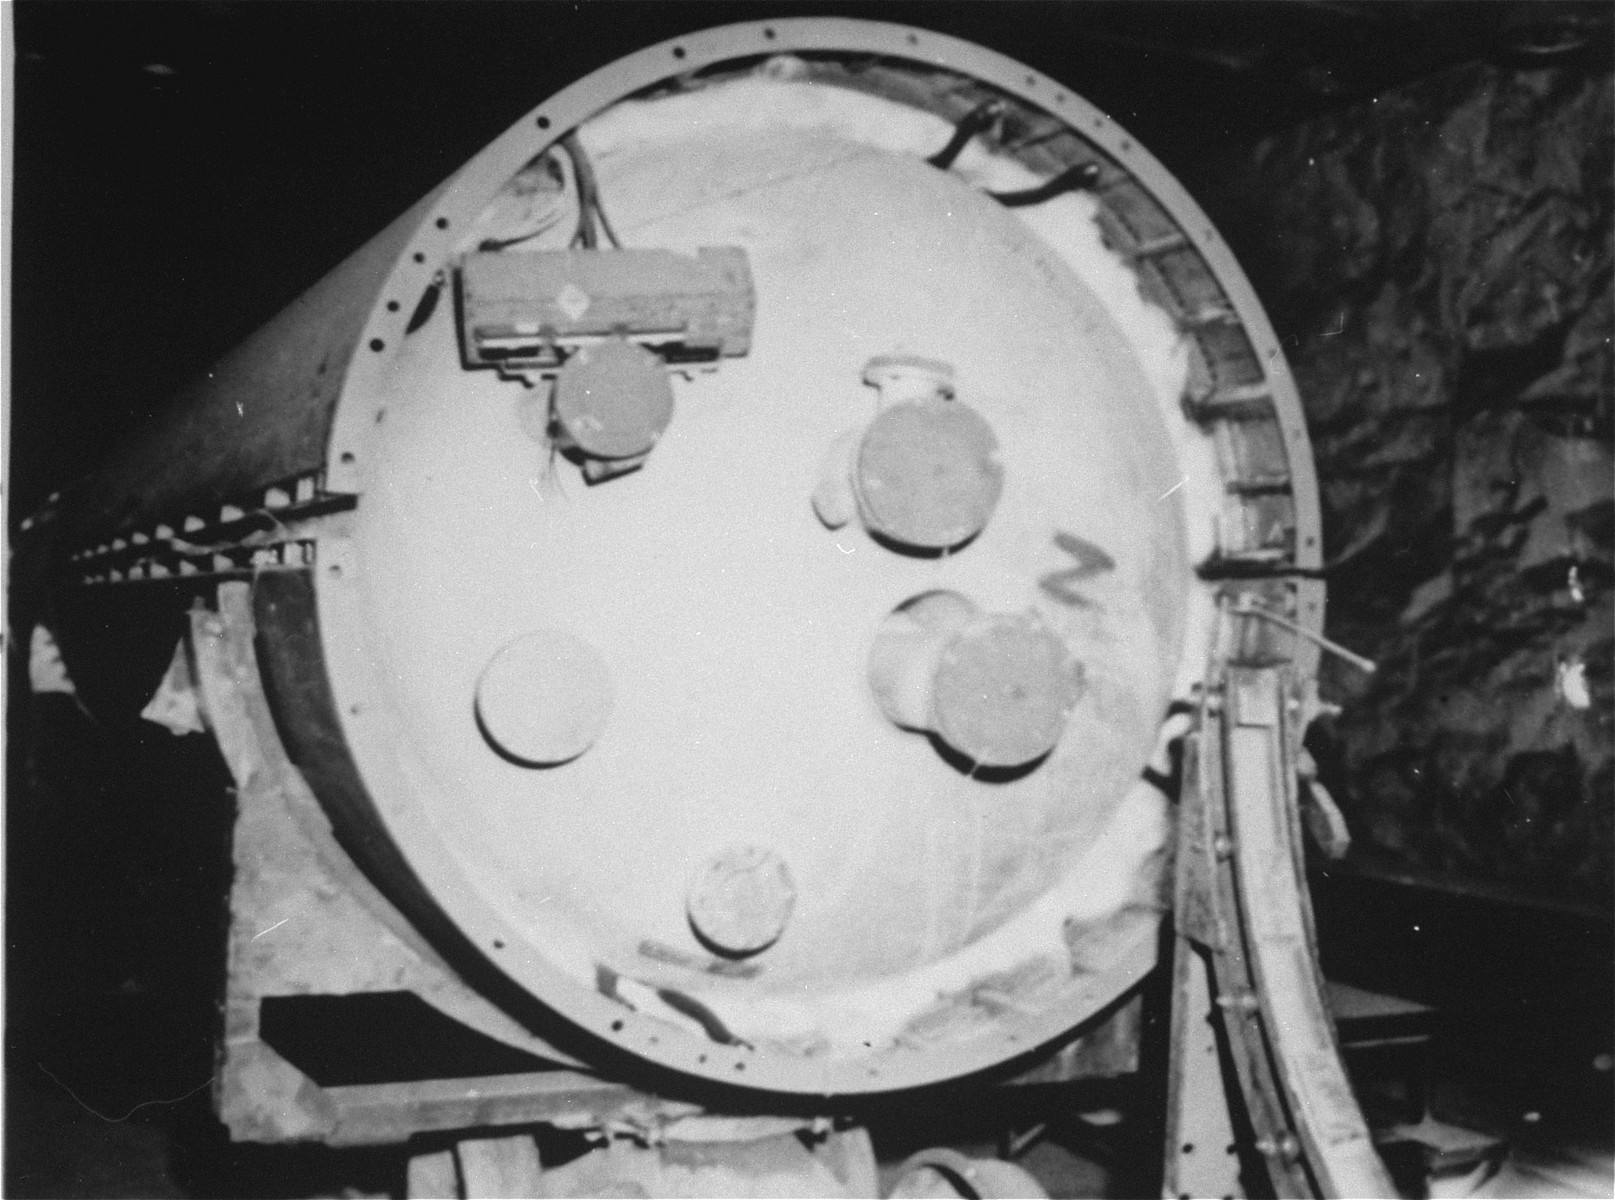 The center section, showing the oxygen tank, of a V-2 rocket in the underground rocket factory at Dora-Mittelbau.